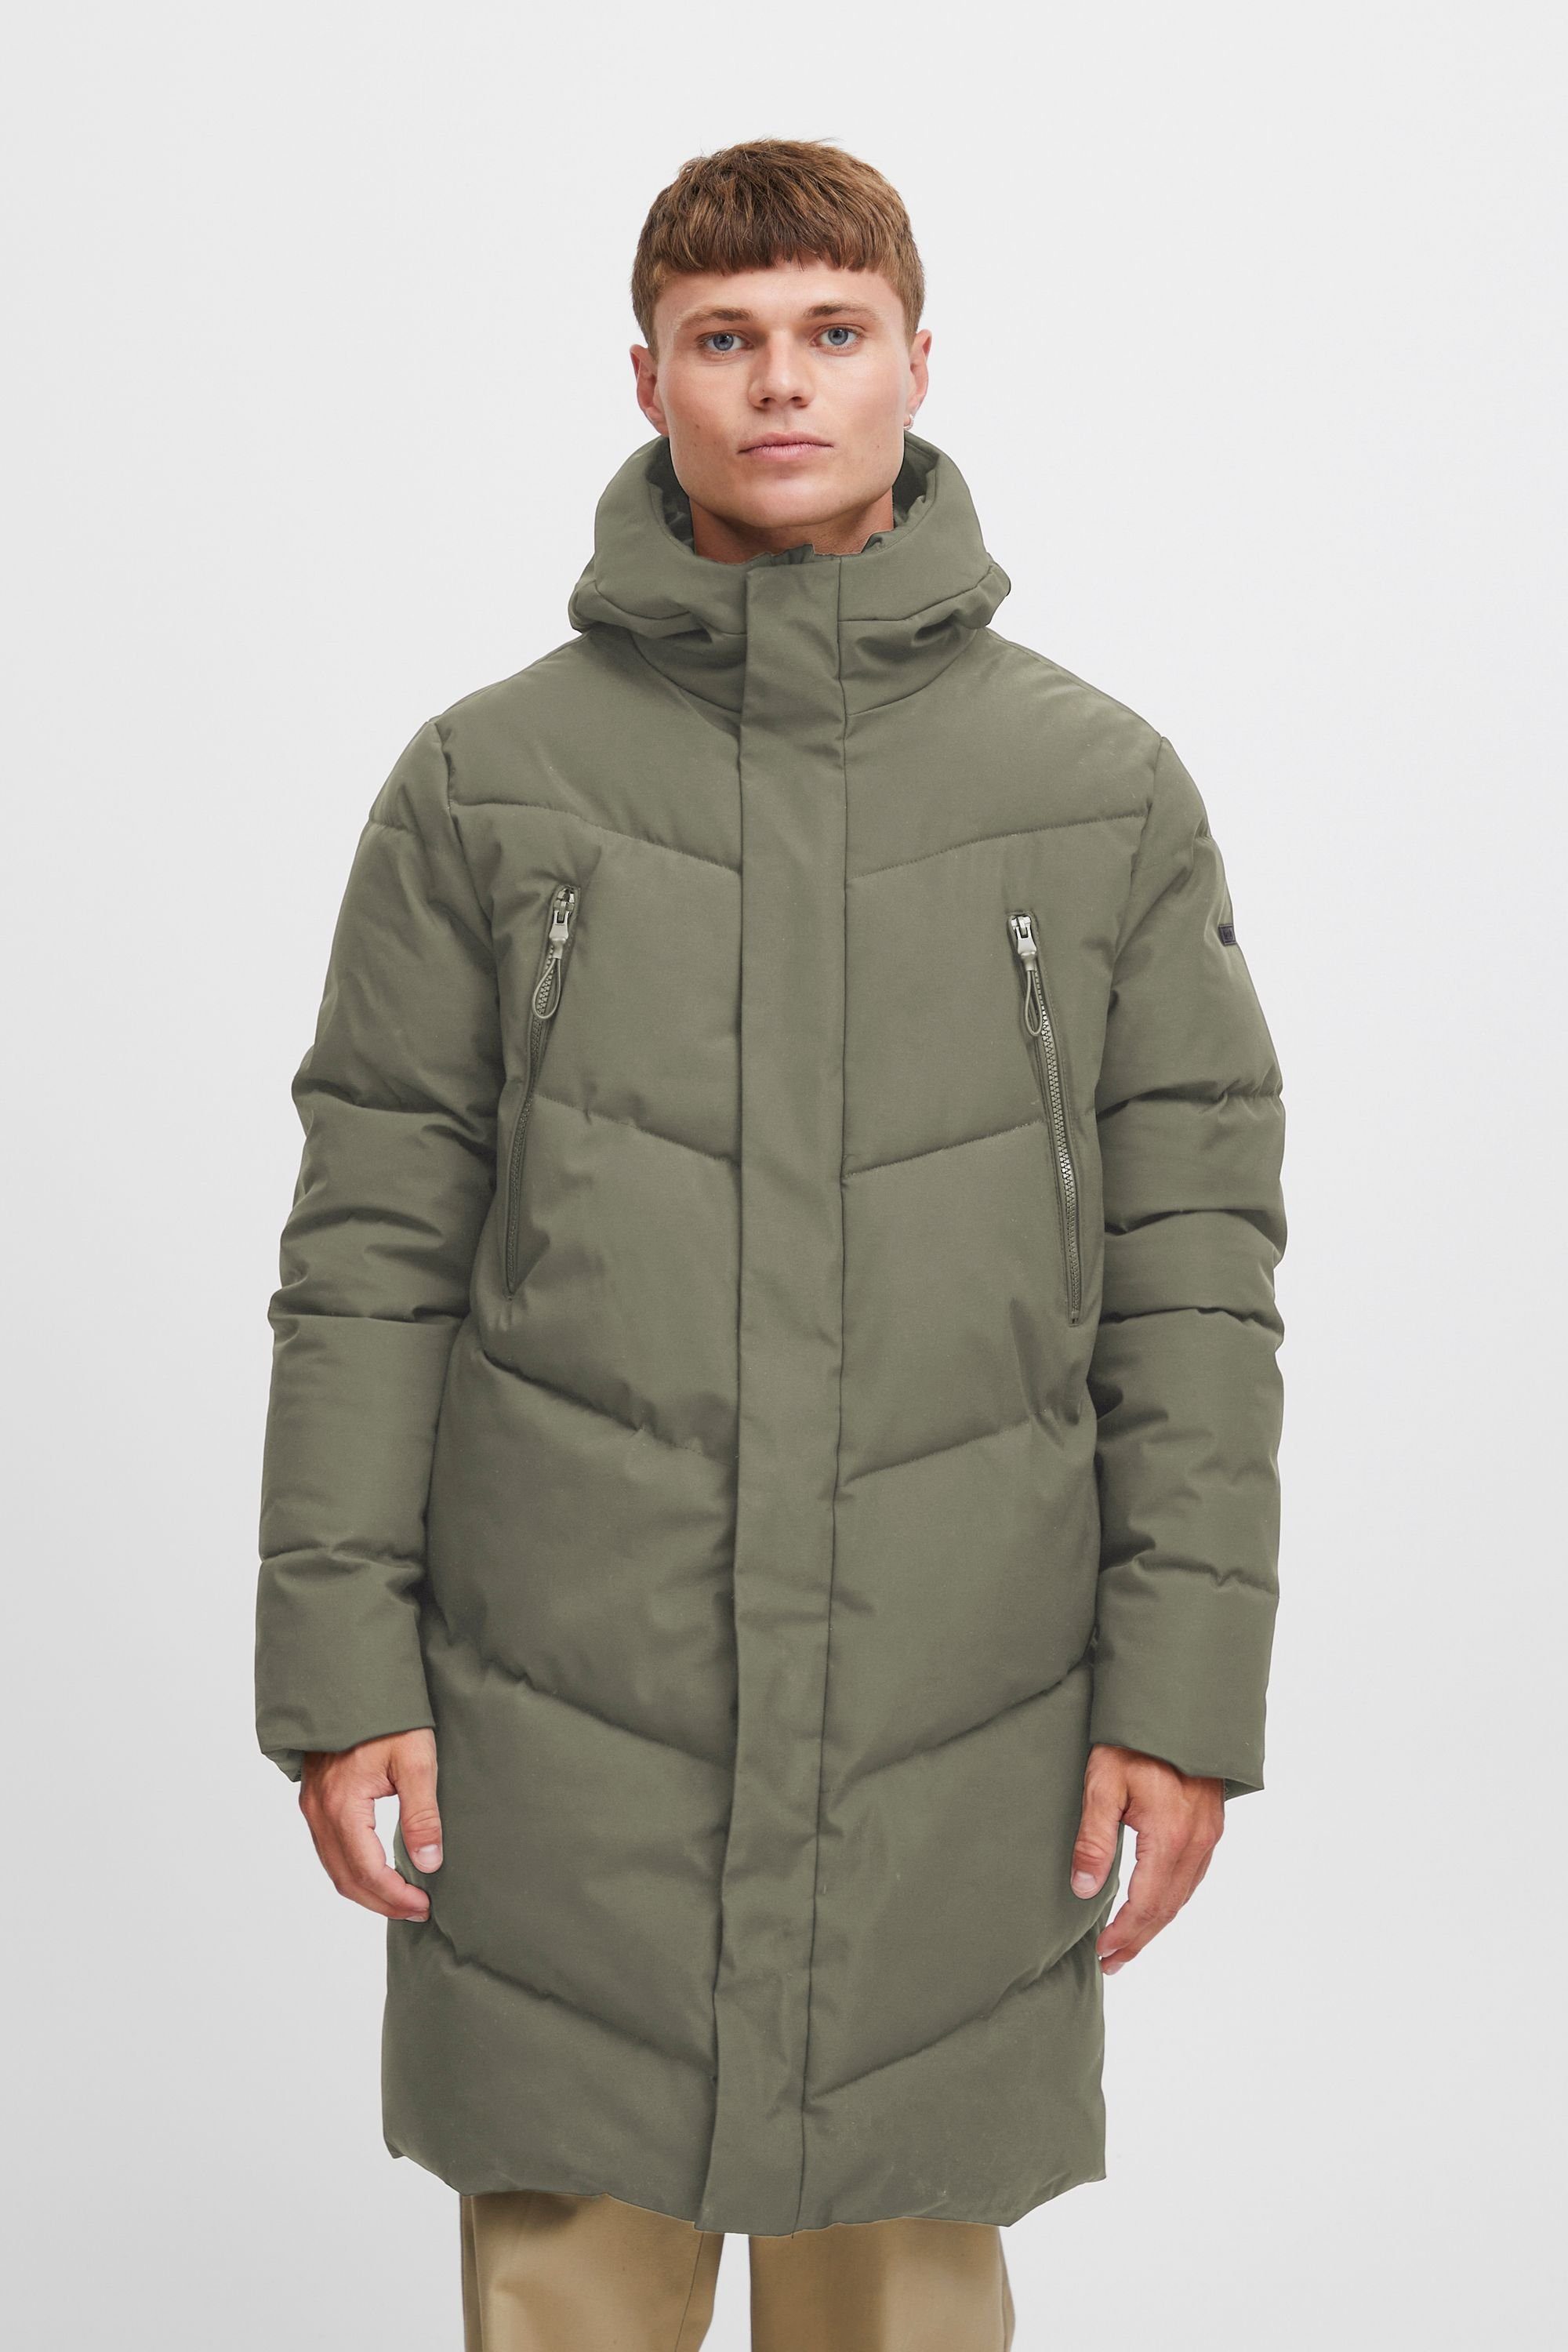 !Solid Steppjacke SDGabe Long Dusty Olive (180515)